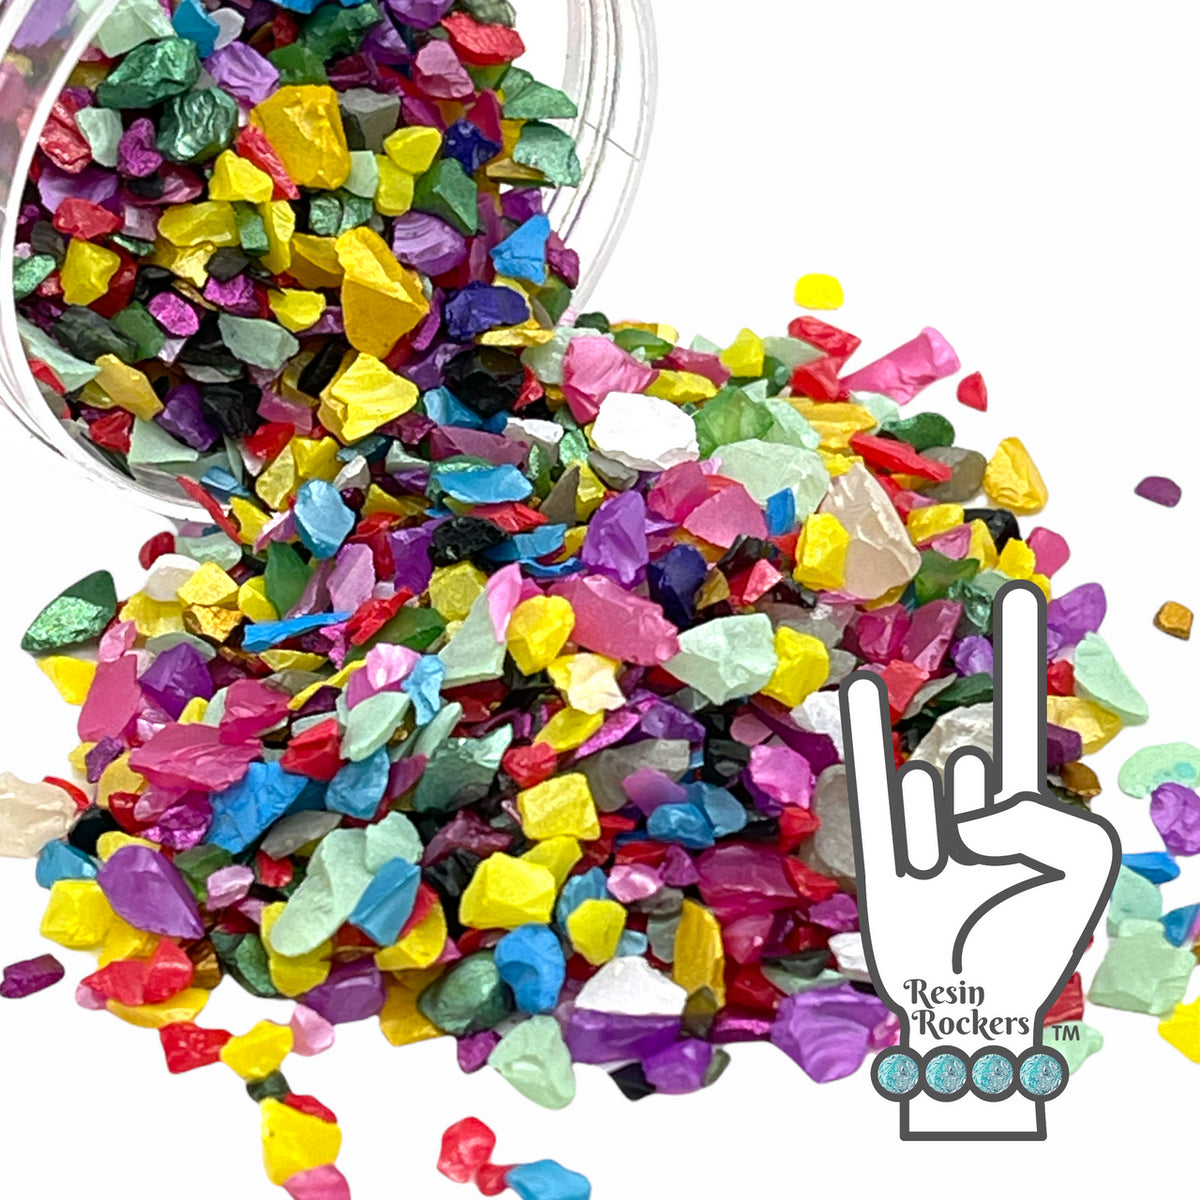 Multi-colored Crushed Glass for UV and Epoxy Resin Art - Resin Rockers